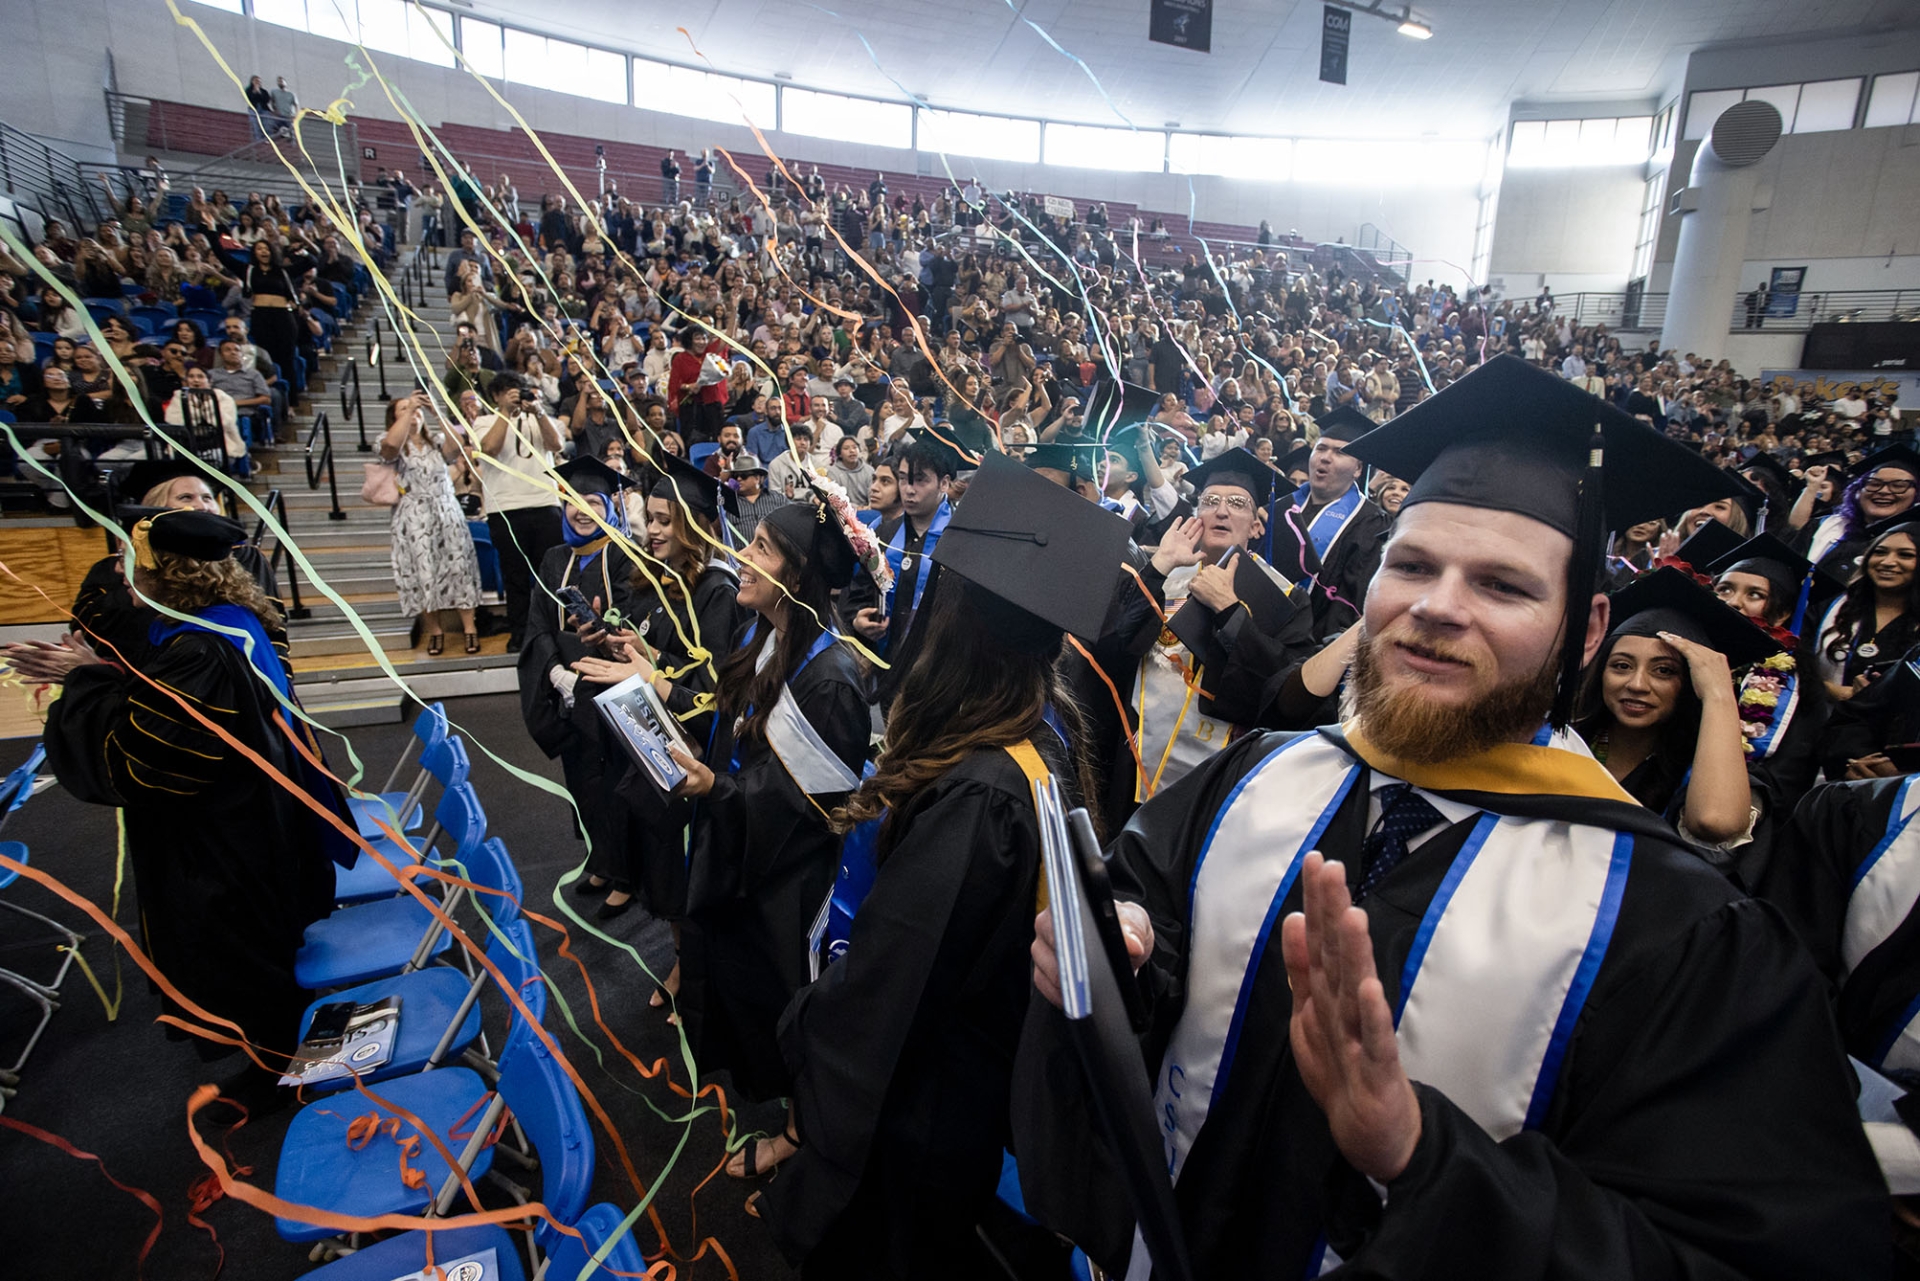 Graduates of the College of Social & Behavioral Sciences (SBS) celebrate during their commencement ceremony on Dec. 16.